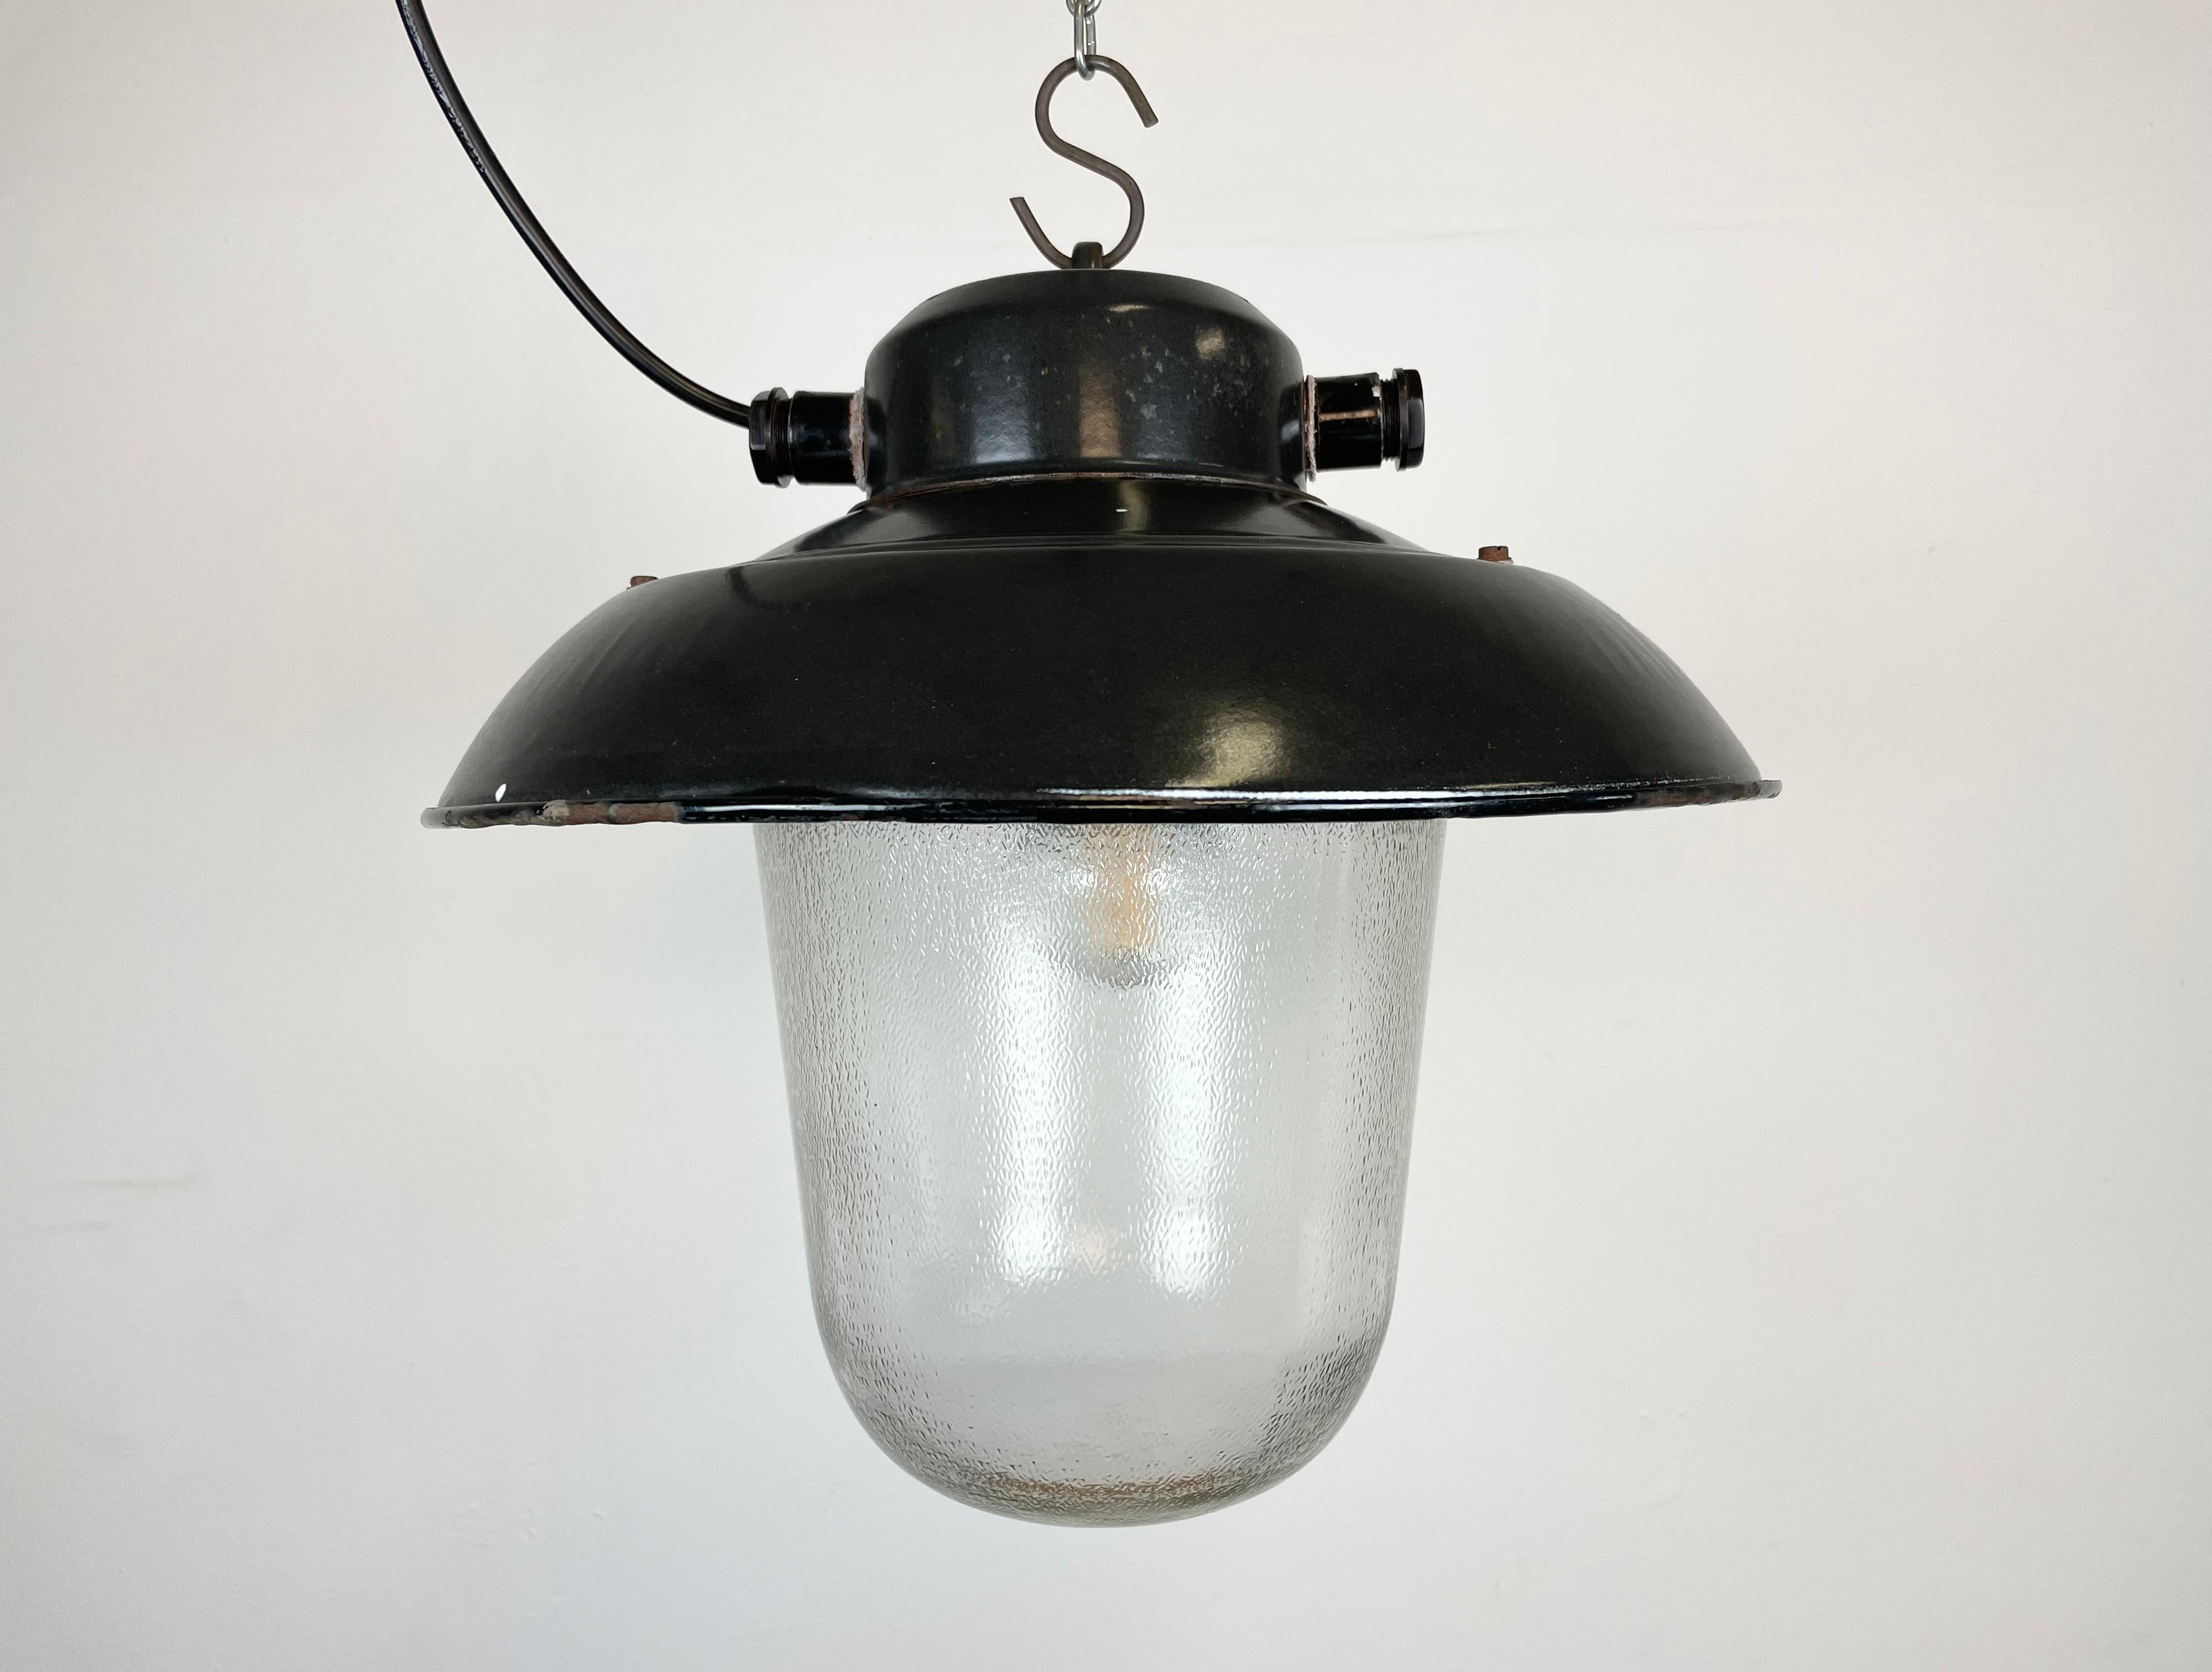 - Vintage industrial lamp made by Elektrosvit in former Czechoslovakia during the 1960s
- Black enamel shade with white interior.
- Frosted glass
- Porcelain socket requires E 27 light bulbs.
- New wire.
- Weight: 4 kg.
- Fully functional.